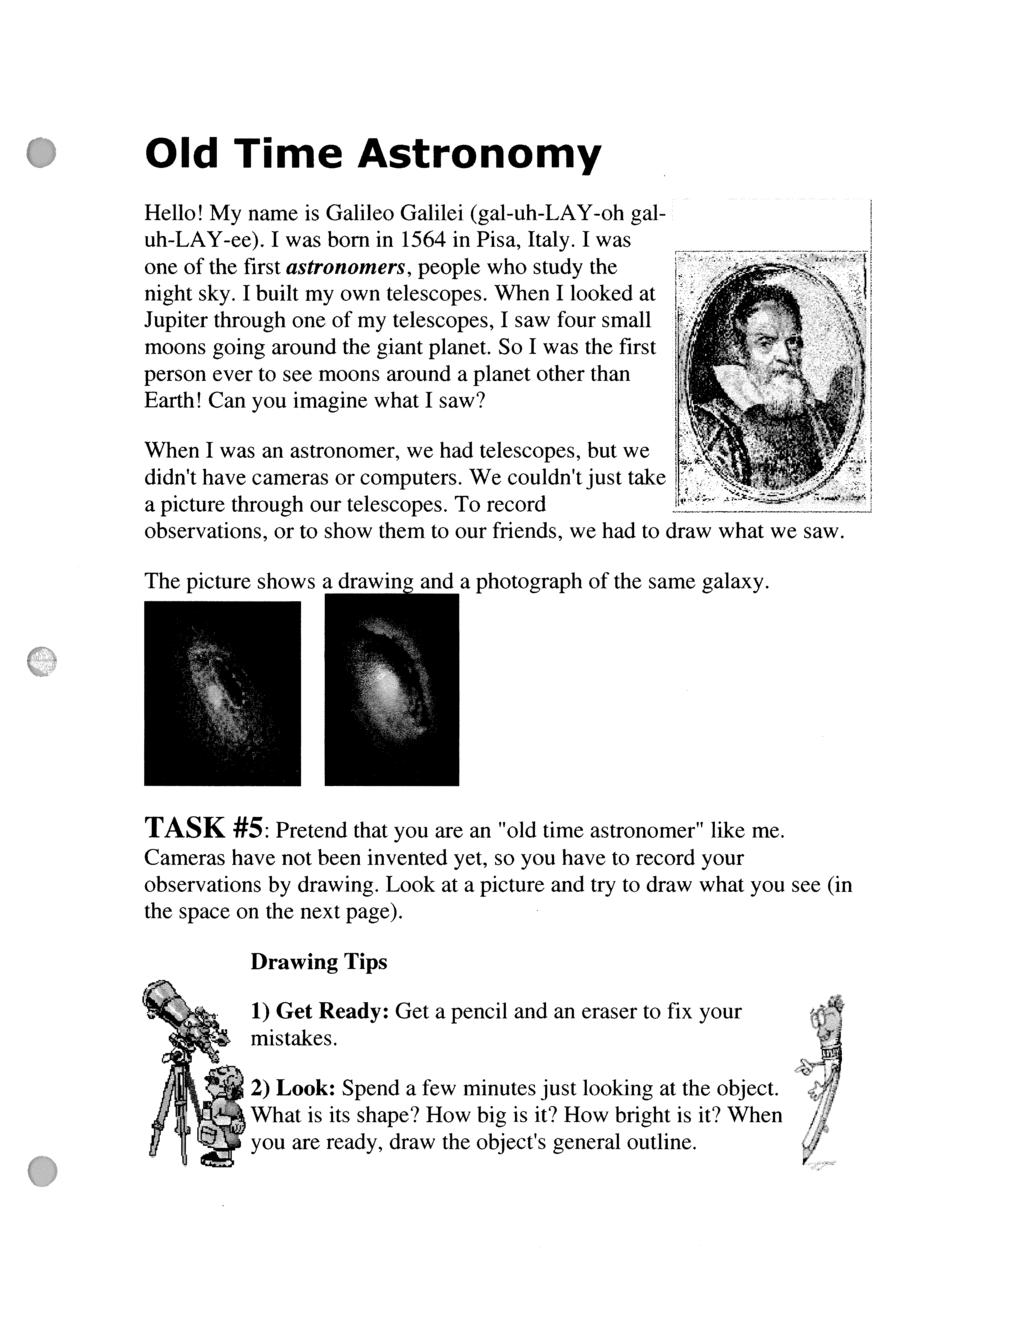 Old Time Astronomy Hello! My name is Galileo Galilei (gal-uh-lay-oh galuh-lay-ee). I was born in 1564 in Pisa, Italy. I was one of the first a s t r o n o m e r s, people who study the night sky.